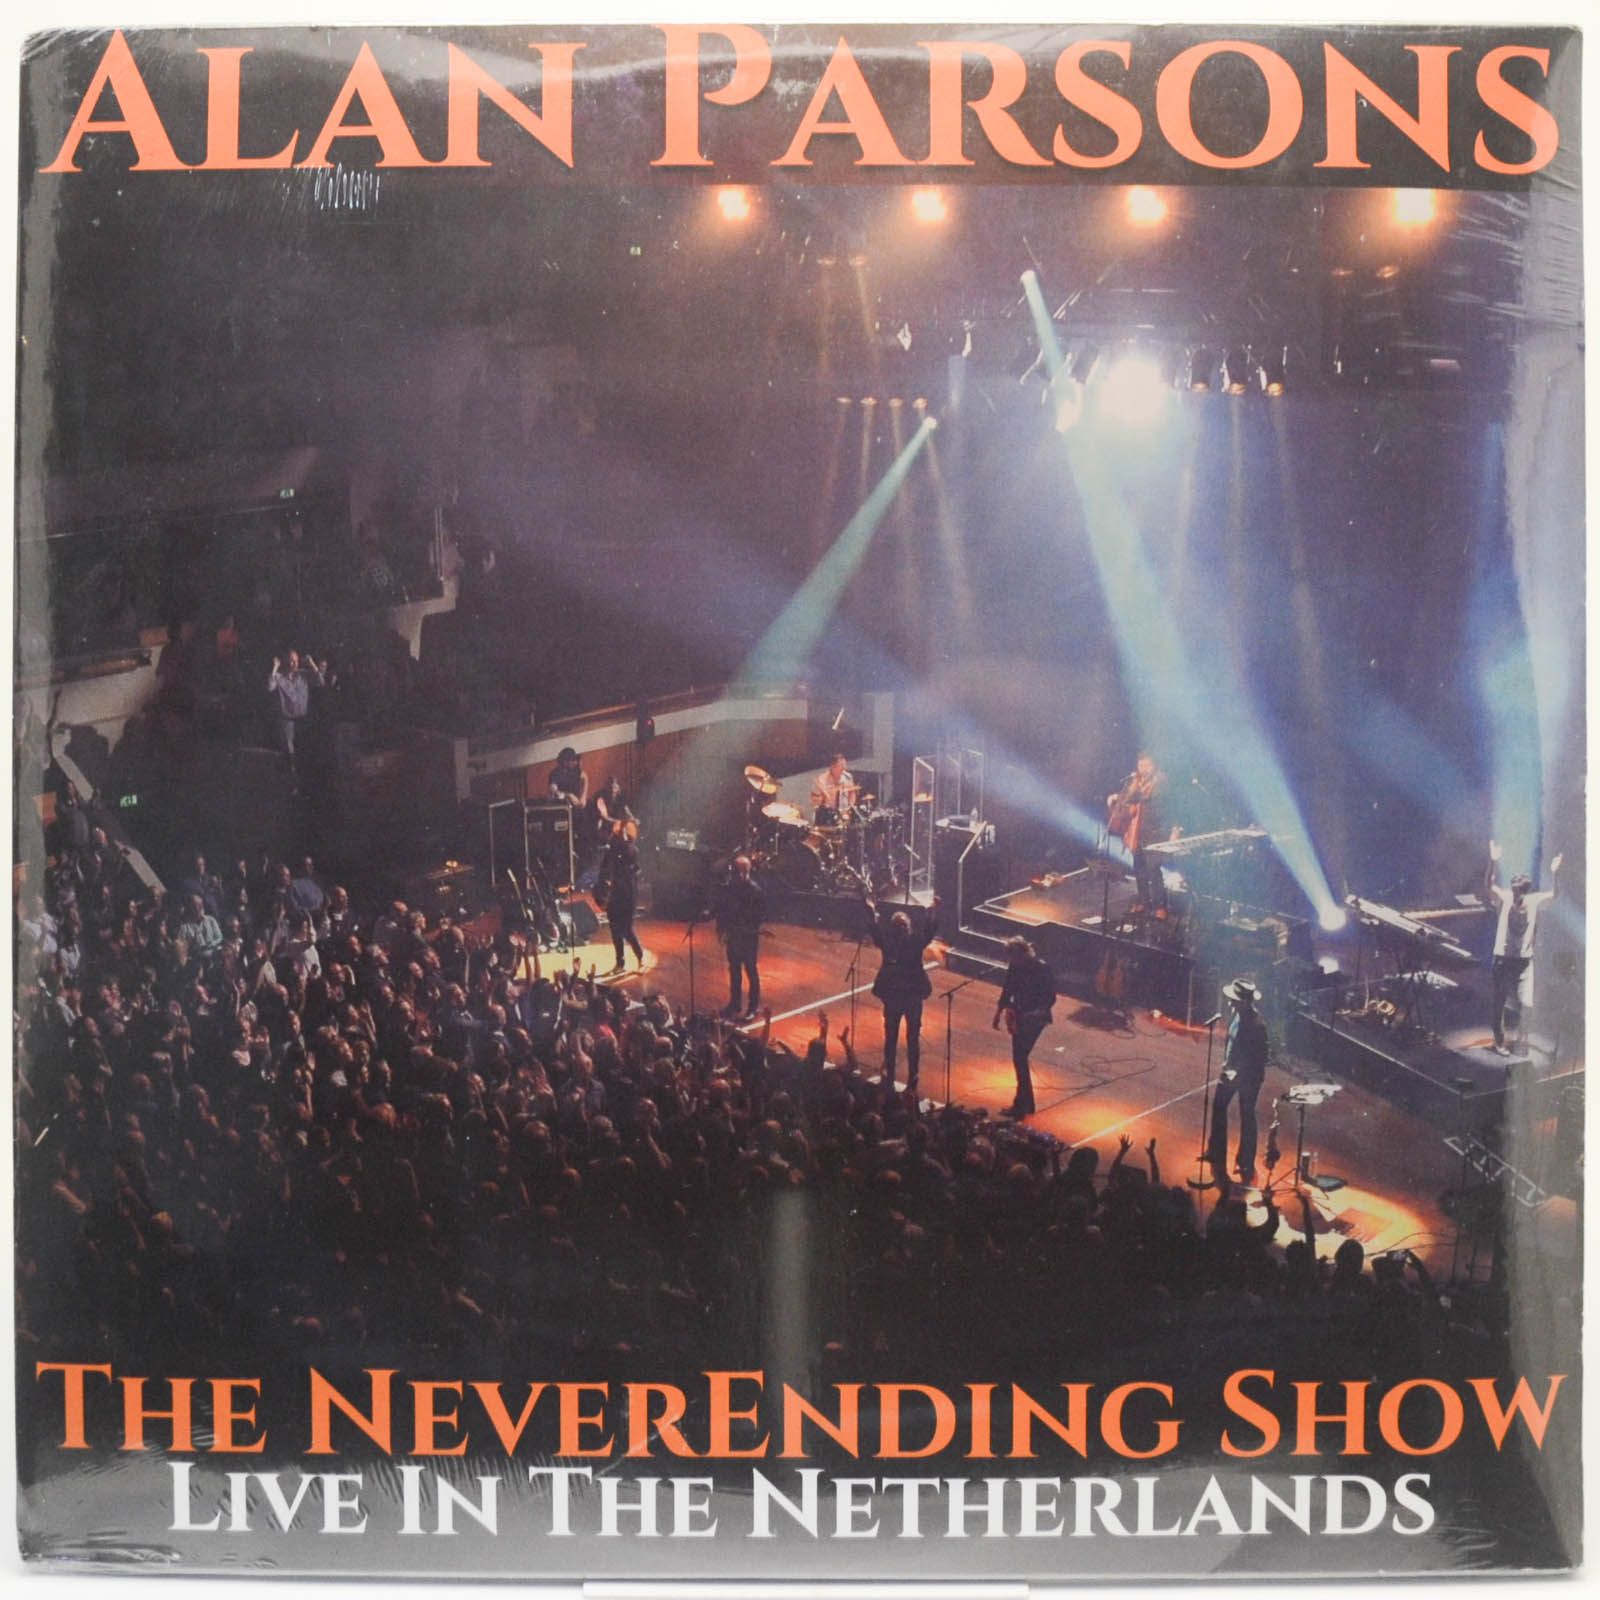 Alan Parsons — The NeverEnding Show (Live In The Netherlands) (3LP), 2021